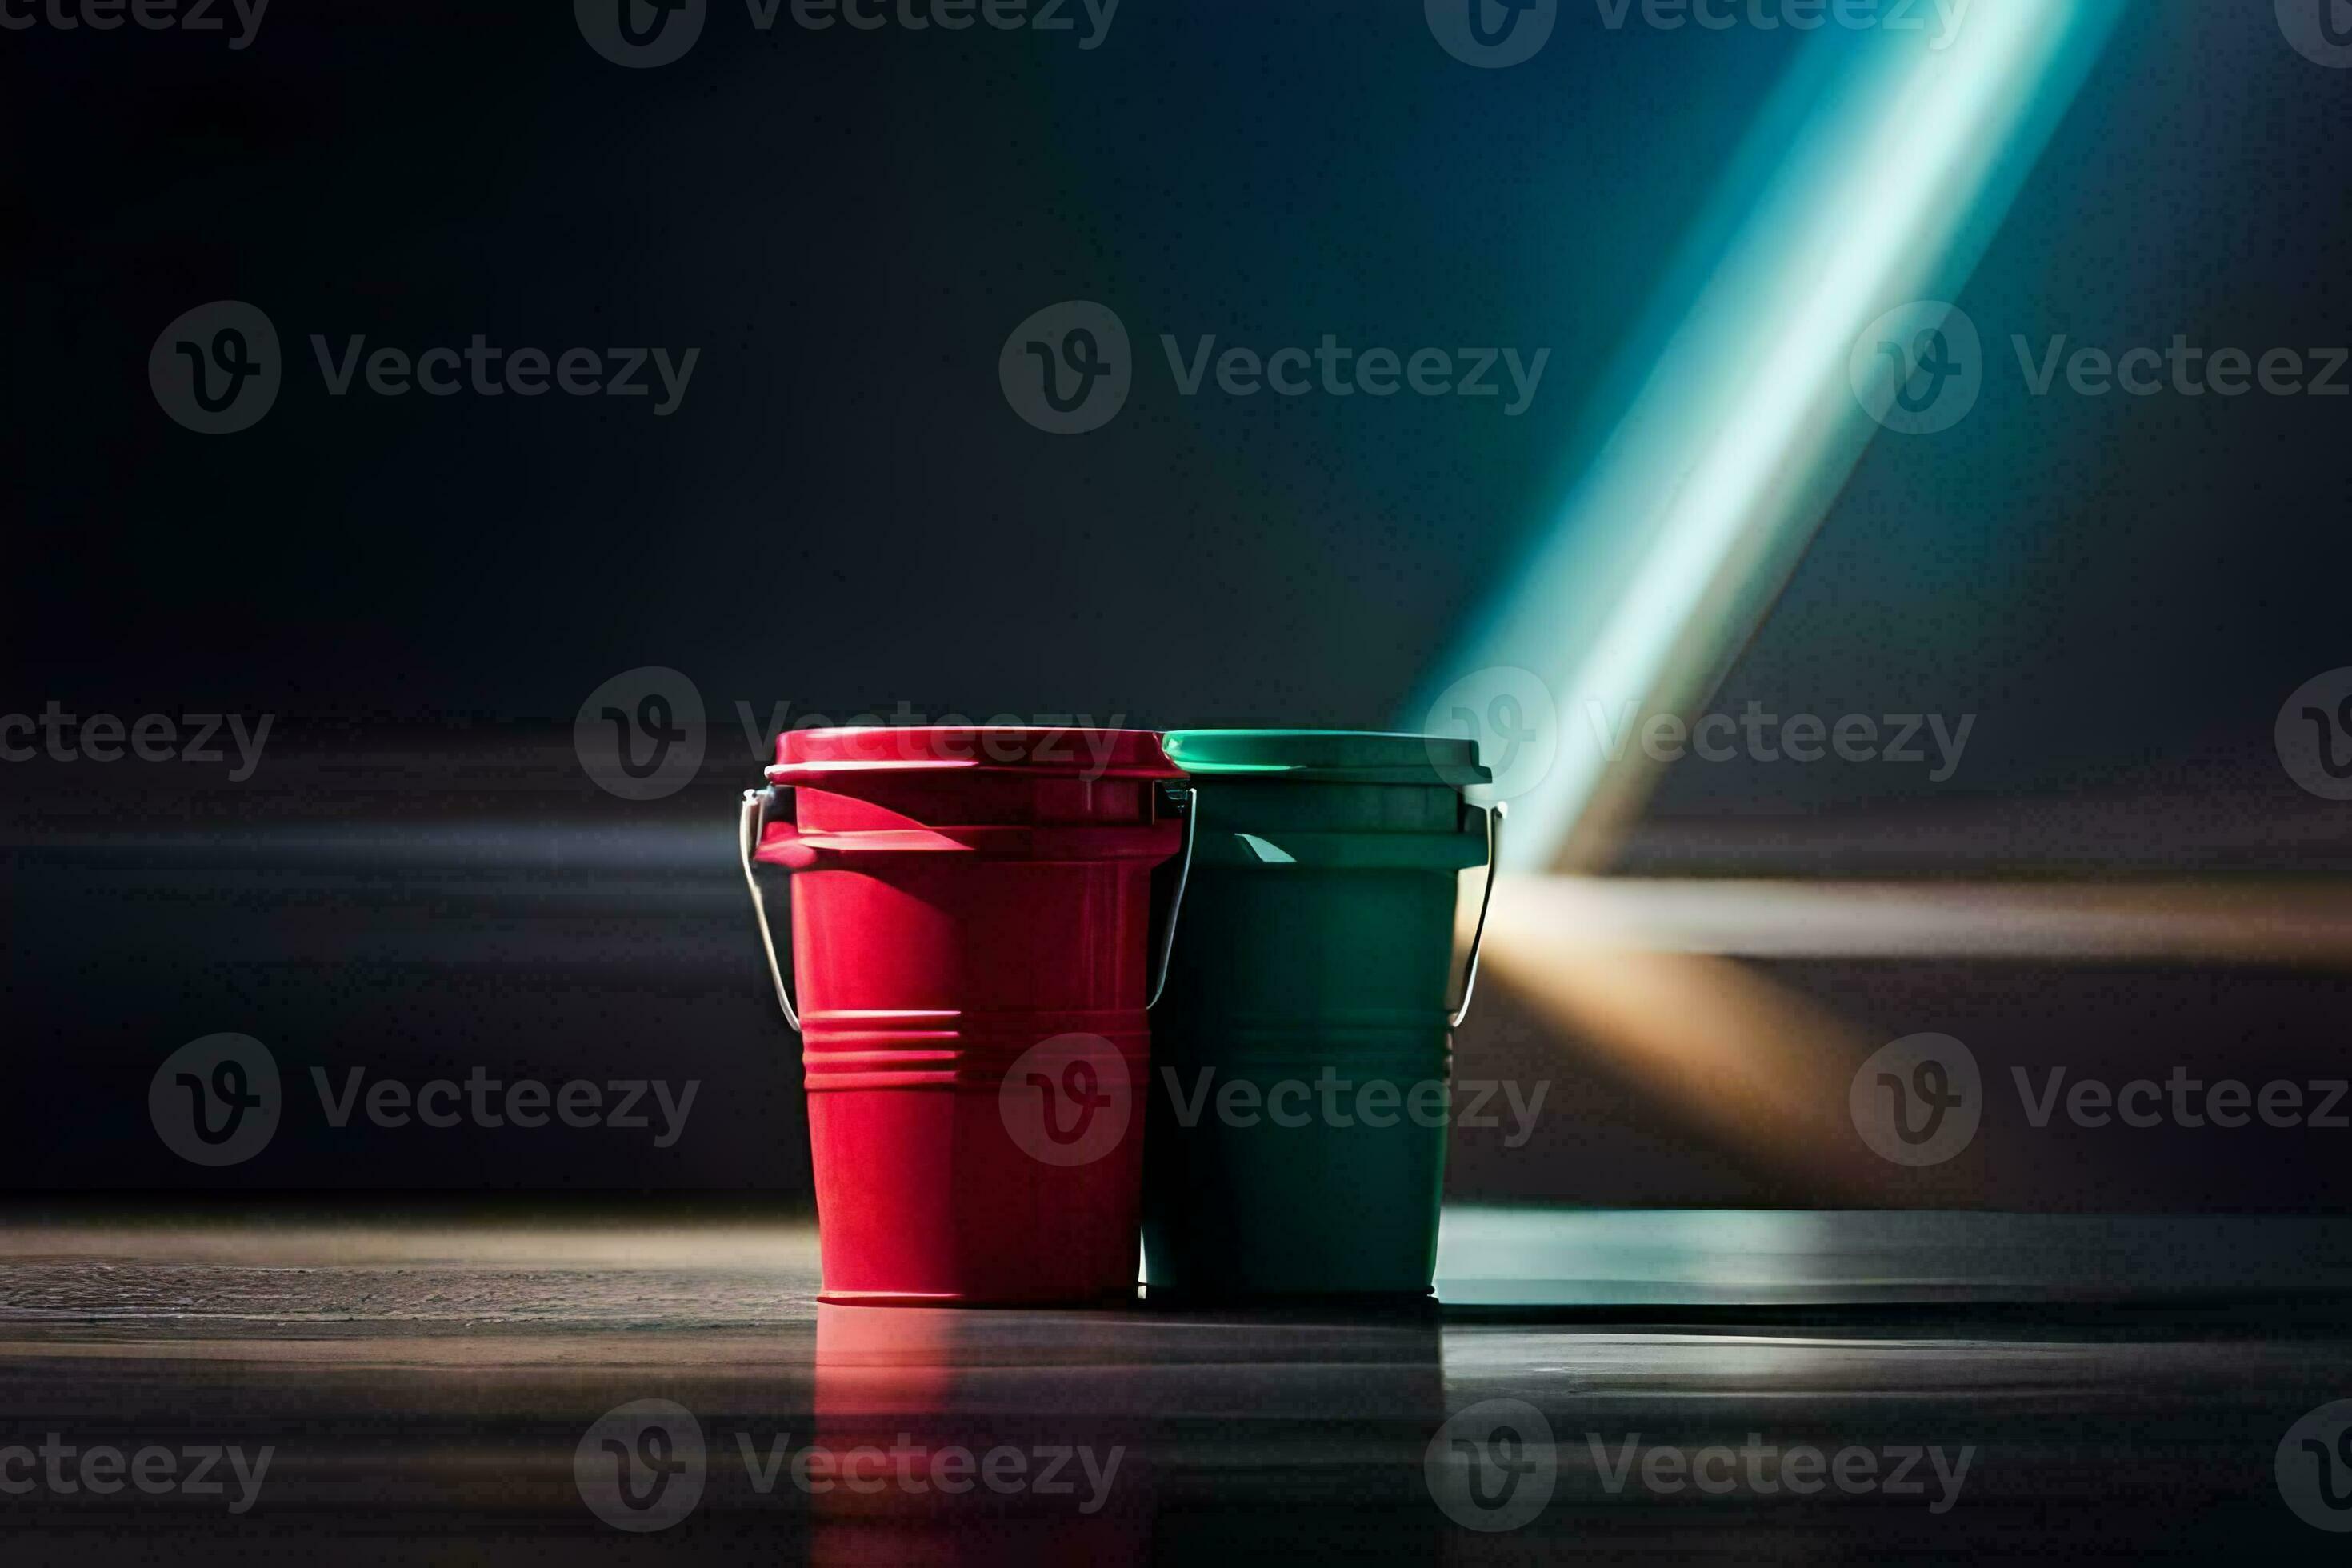 https://static.vecteezy.com/system/resources/previews/033/457/439/large_2x/two-red-and-green-plastic-cups-on-a-table-ai-generated-photo.jpg